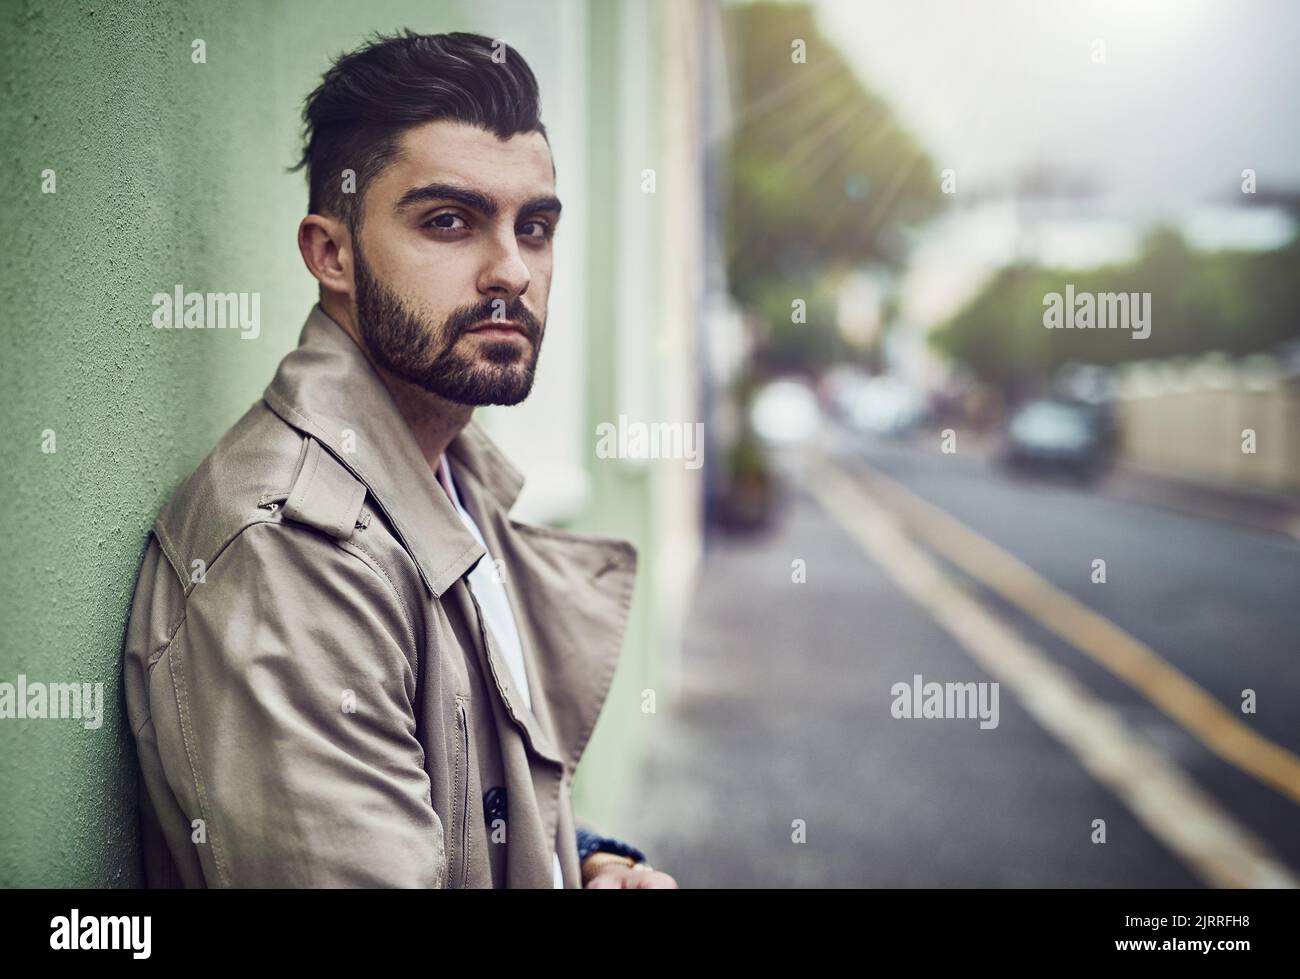 Inner city styling. Portrait of a fashionable young man wearing urban wear in the city. Stock Photo